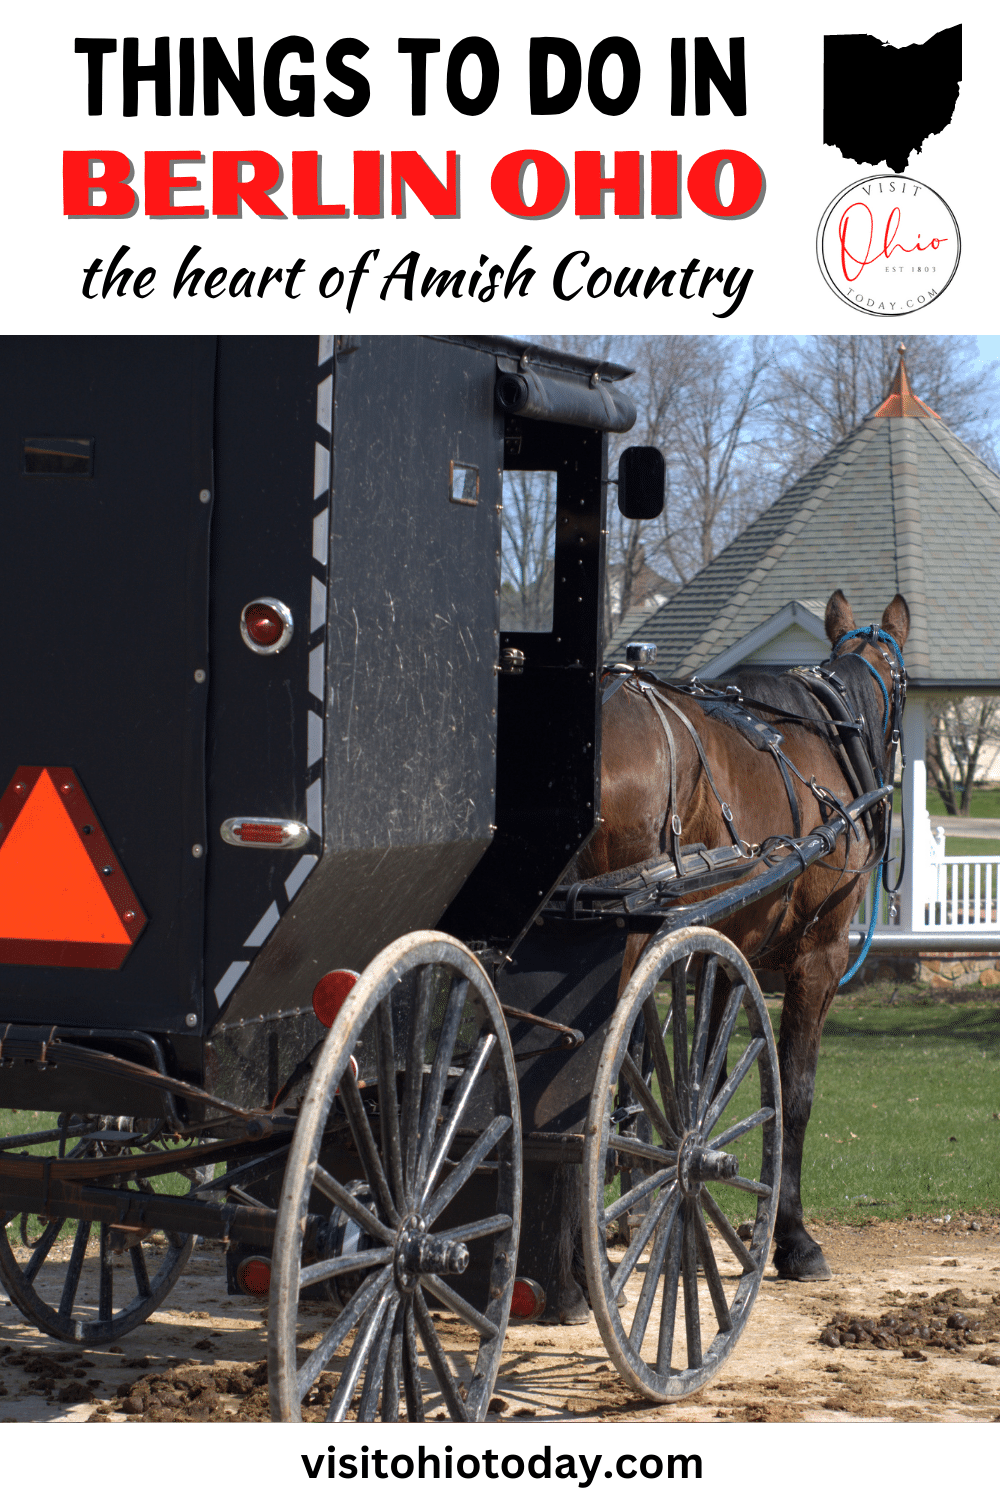 Considered the heart of Amish Country, there are many Amish-related things to do in Berlin Ohio. Although there are some fun and educational places to visit, Berlin is all about shopping!